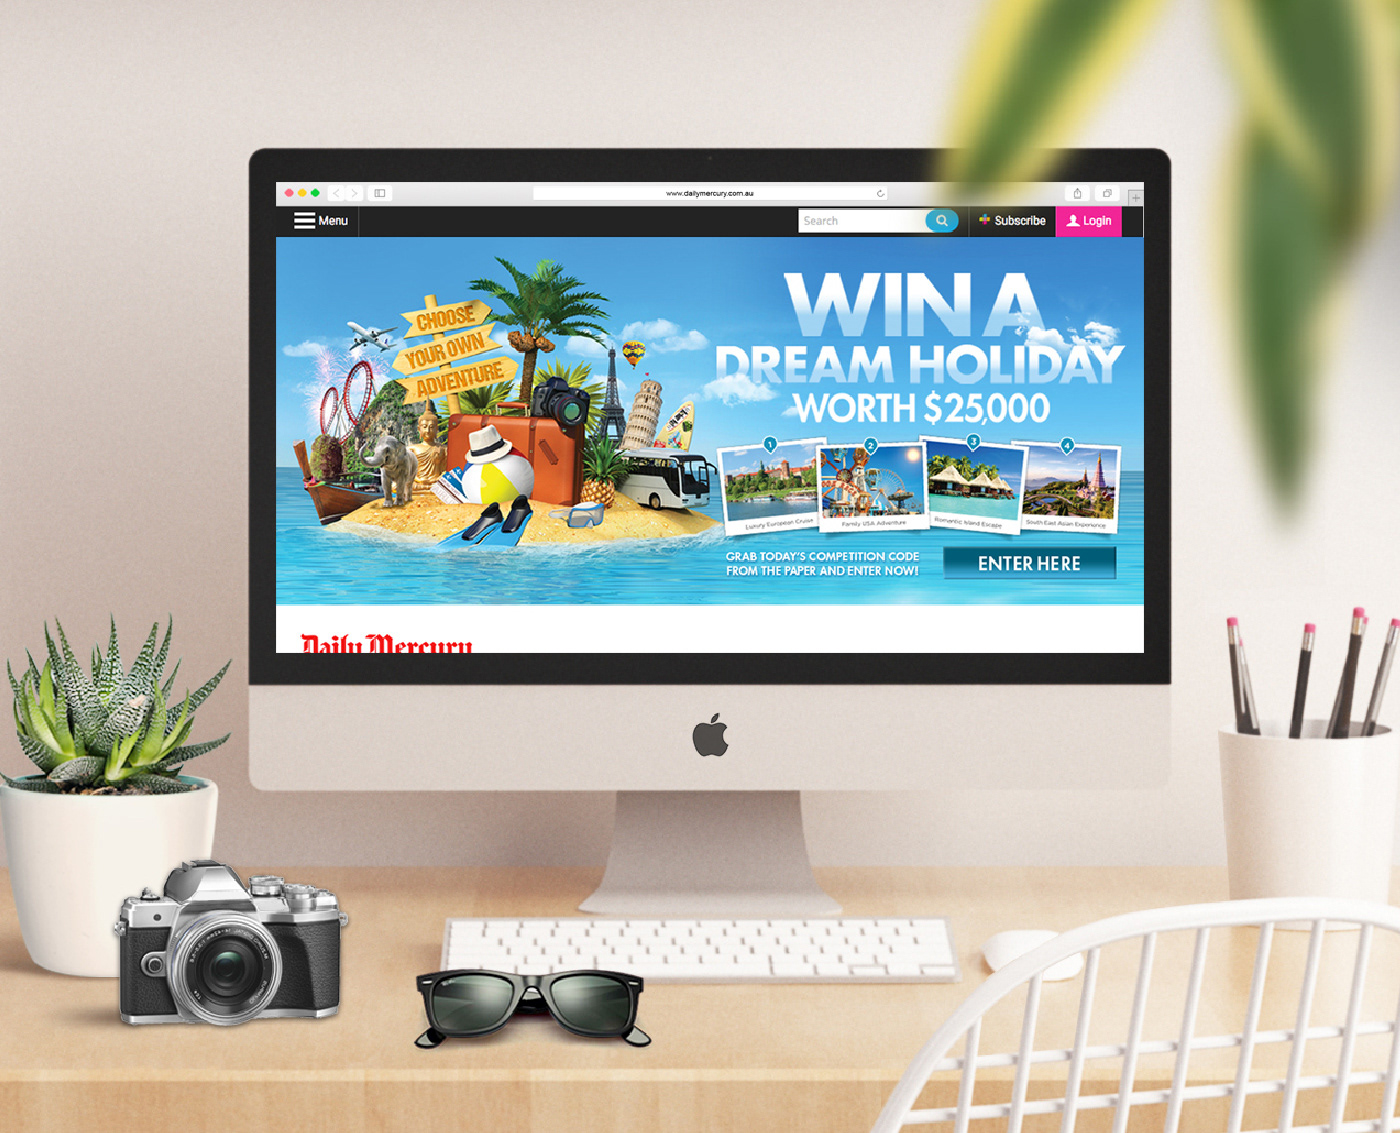 hello world Travel tourism tourism collateral poster social media online Competition